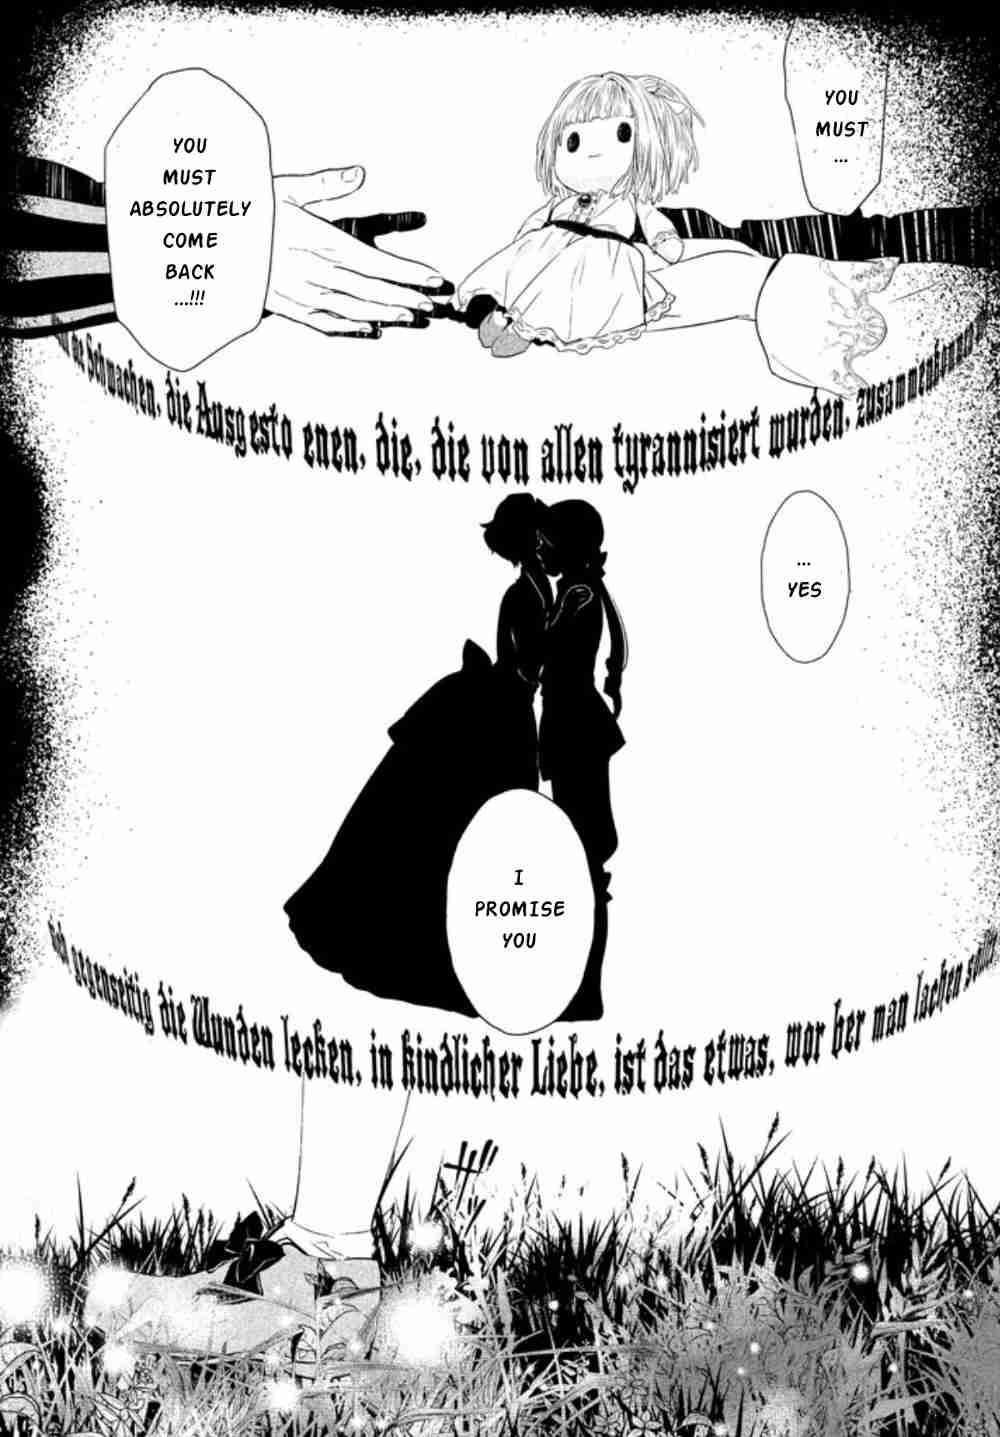 Shin'yaku Märchen Ch. 3 Ido That Leads to the Forest That Leads to Ido Part 3